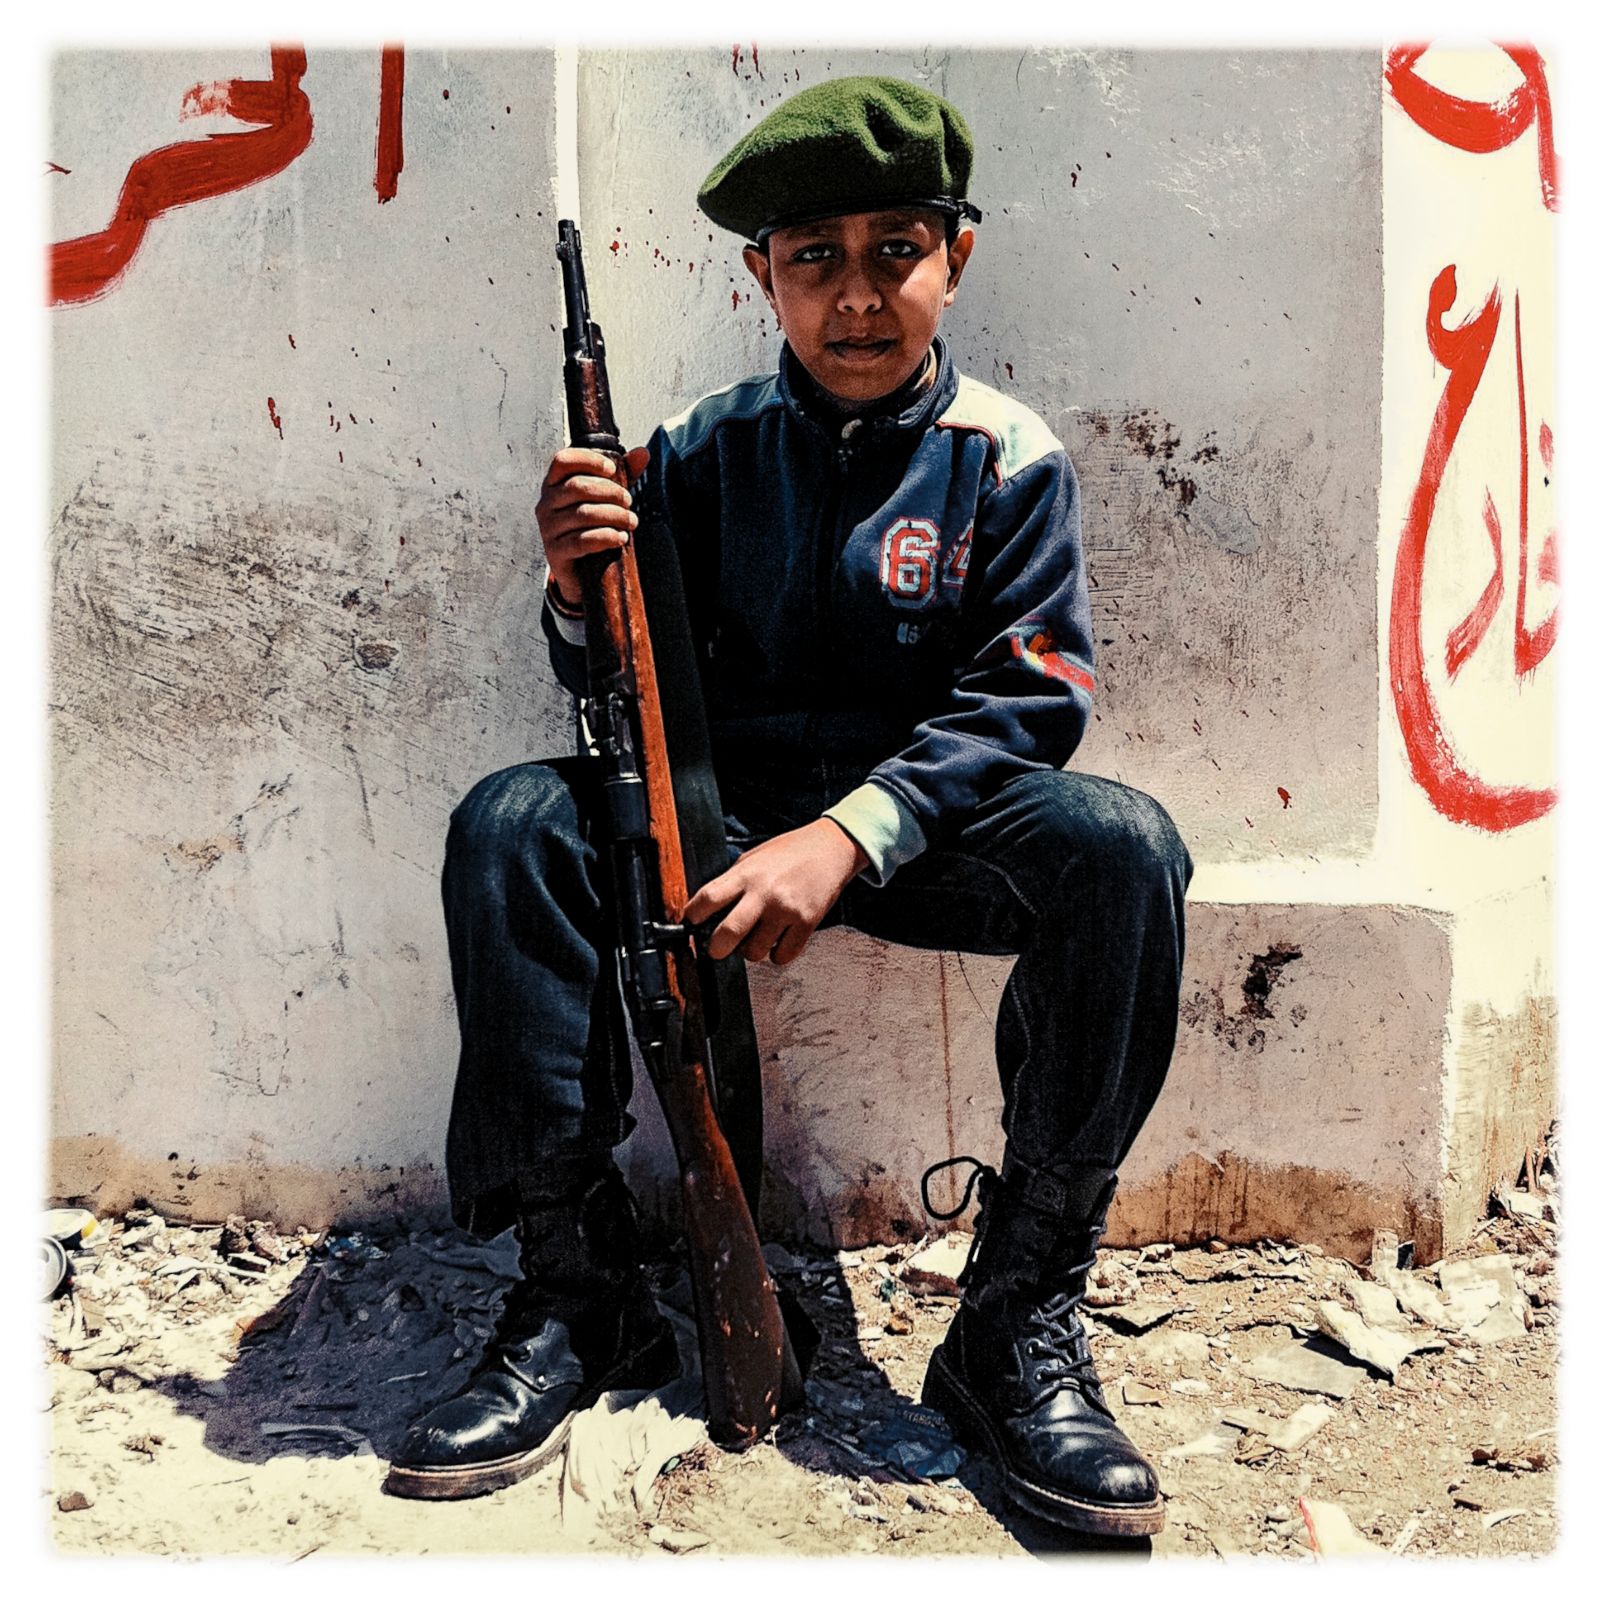 Blood and Determination: A Young Photographer's Intro to a Revolution ...